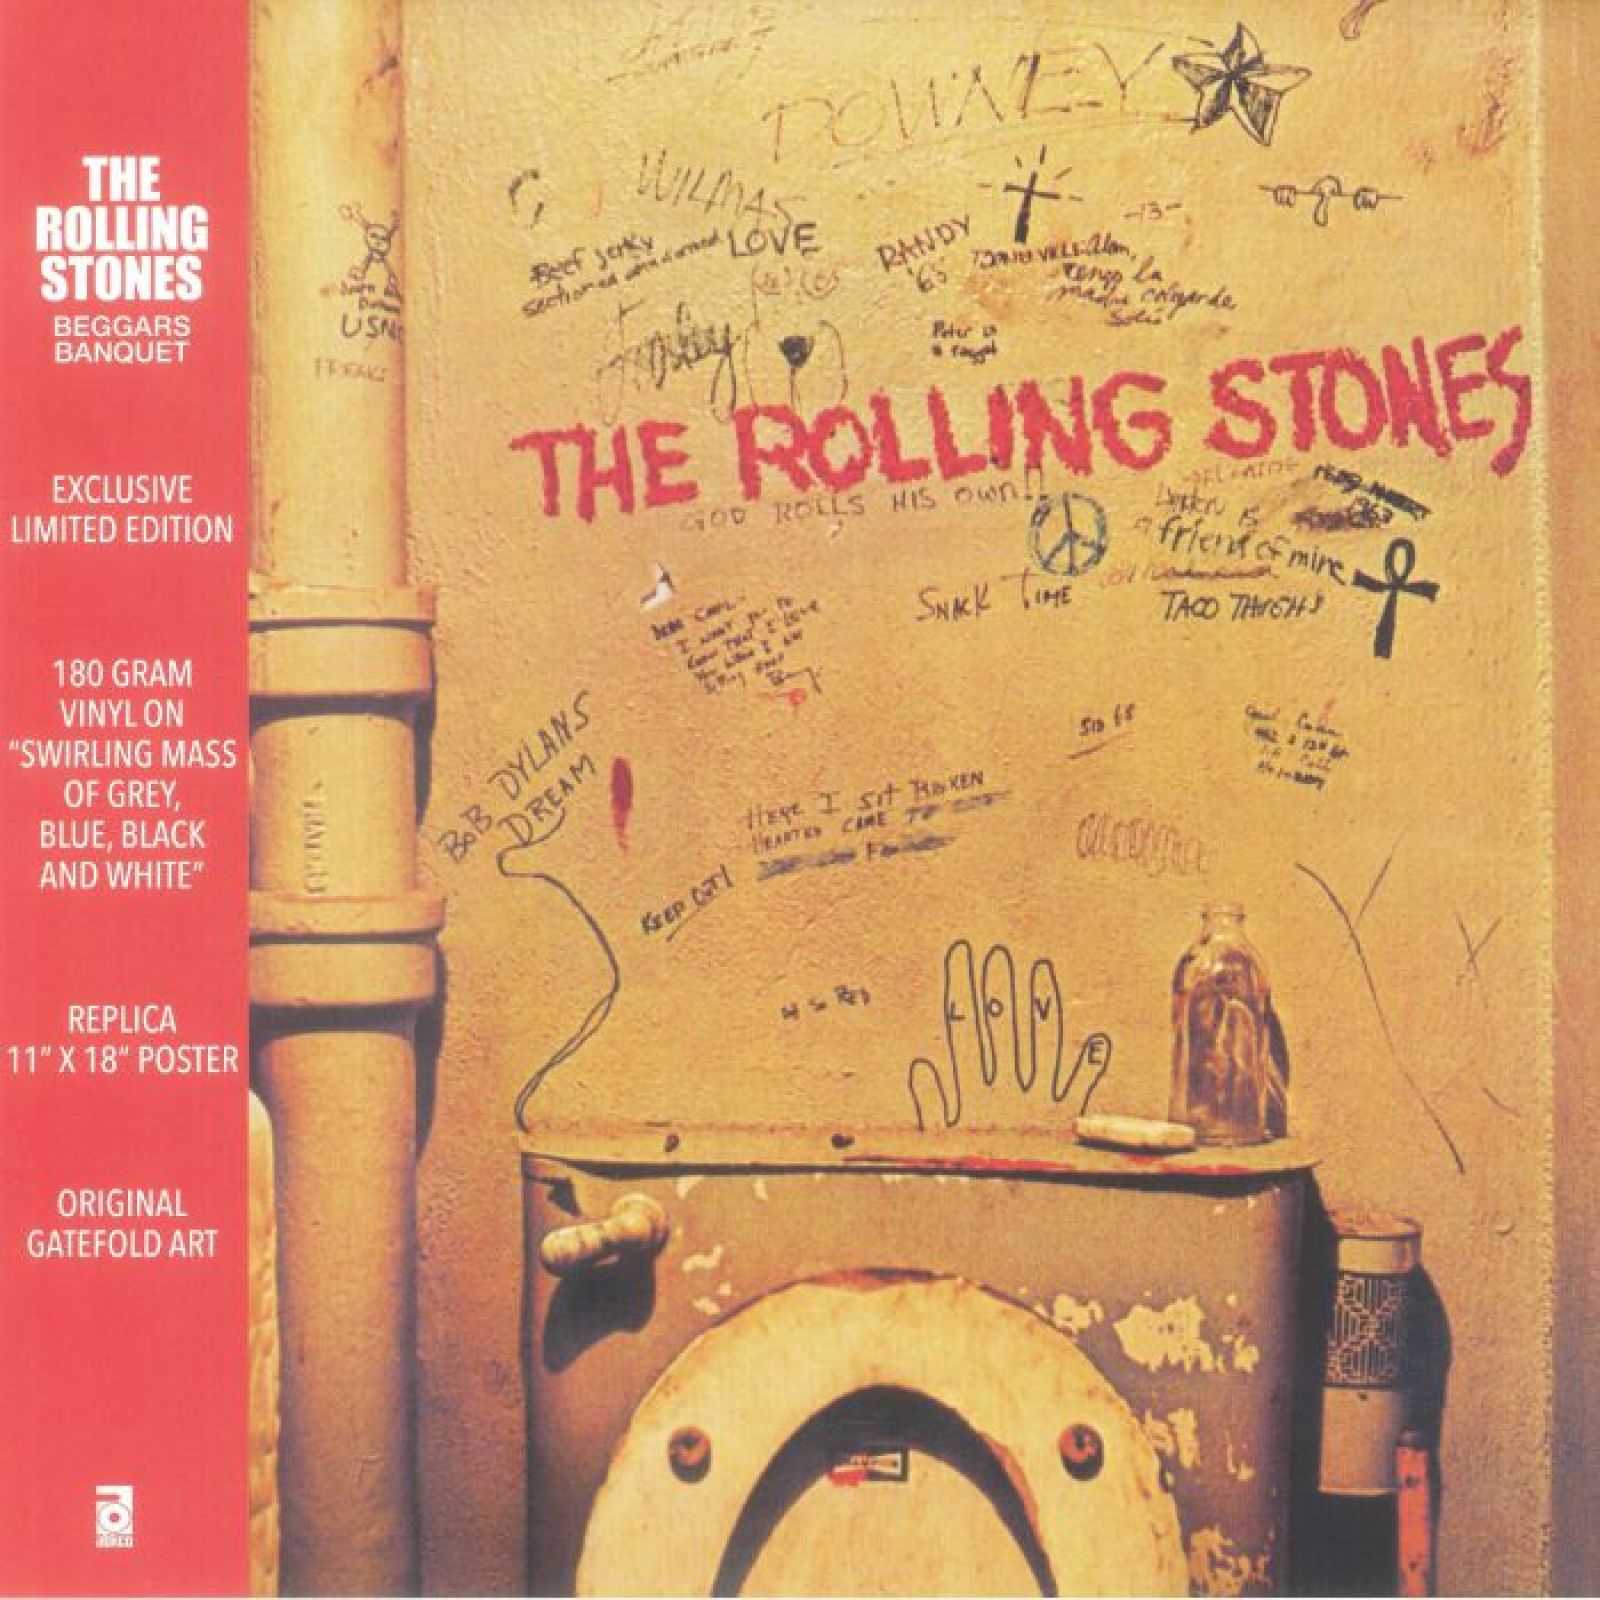 Виниловая пластинка Rolling Stones, The, Beggars Banquet (Coloured) (0018771214519) the rolling stones – beggars banquet lp